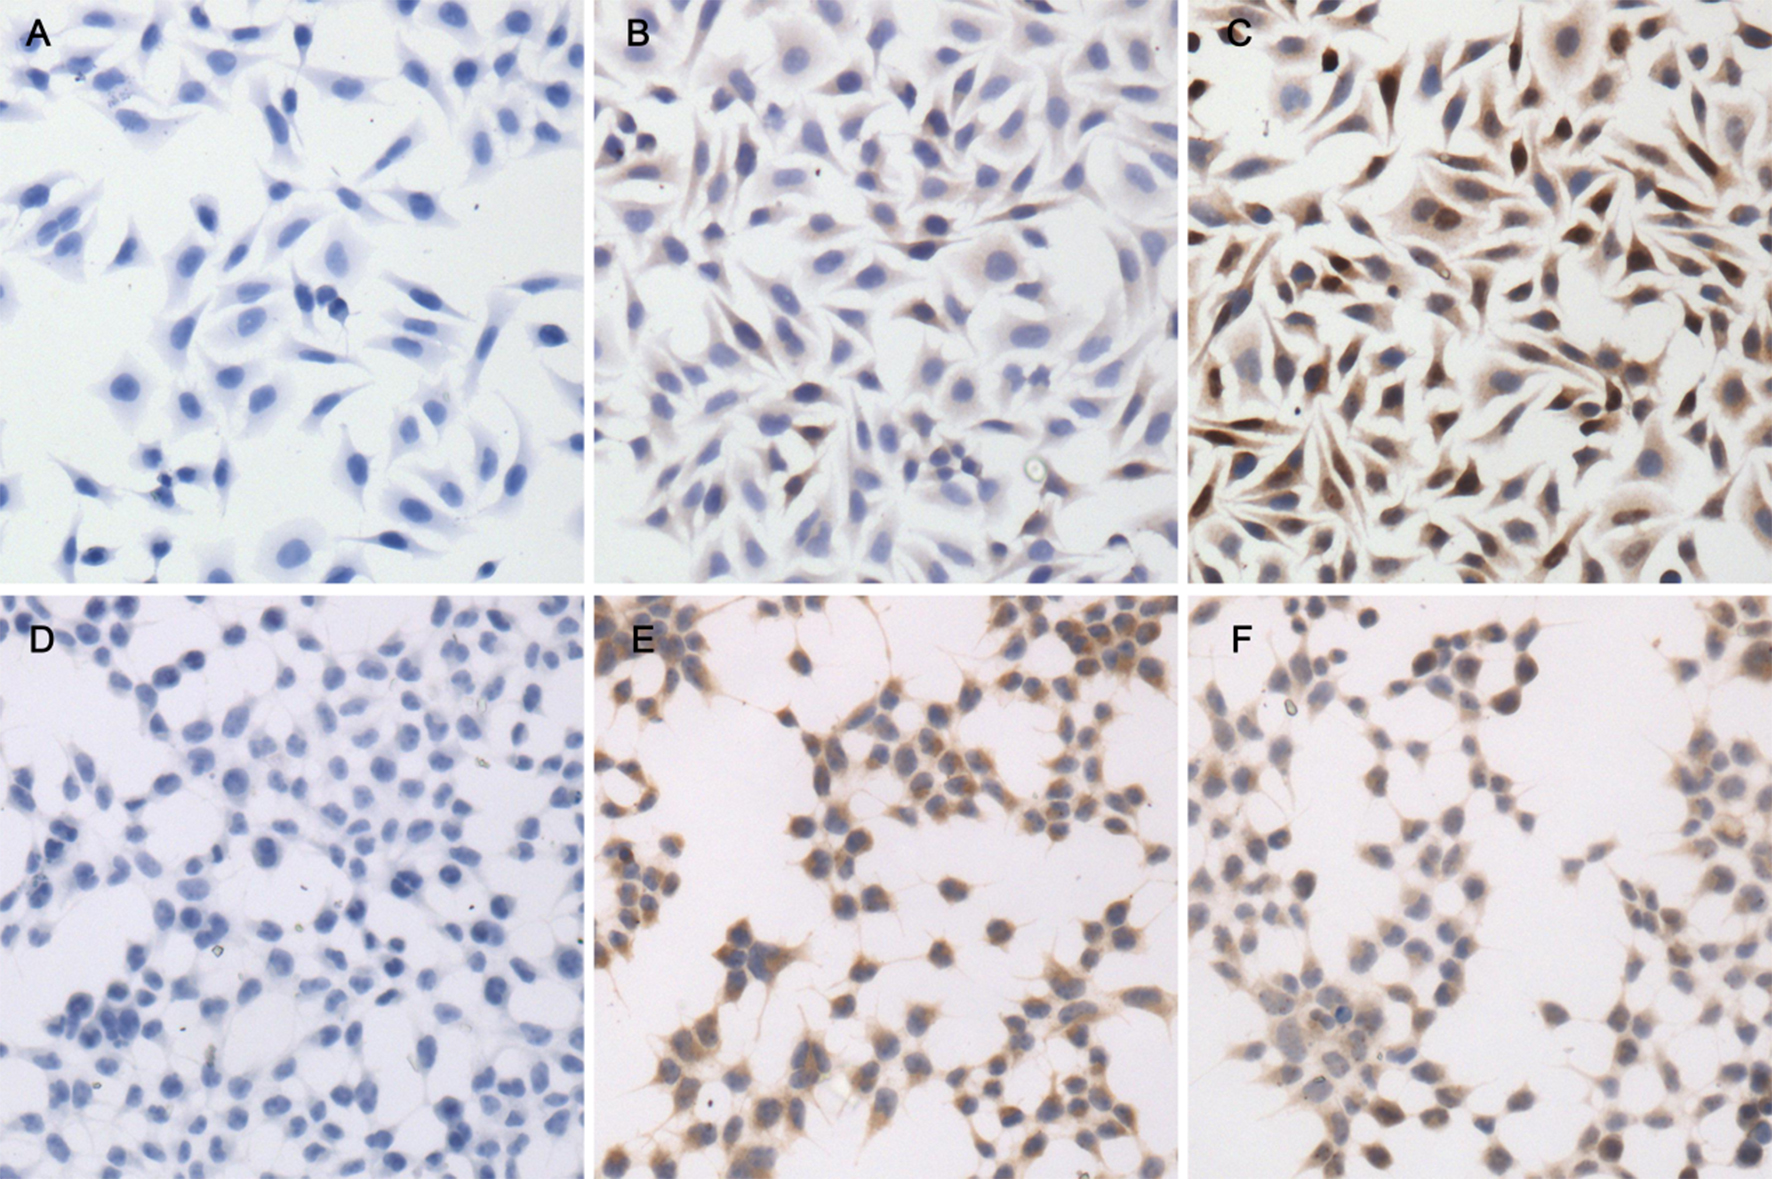 Representative images of ICC in HeLa and HEK293 cells. (A) Blank control in HeLa cells. (B) FHIT expression in HeLa cells. (C) MYC expression in HeLa cells. (D) Blank control in HEK293 cells. (E) FHIT expression in HEK293 cells. (F) MYC expression in HEK293 cells. Original magnification × 200.